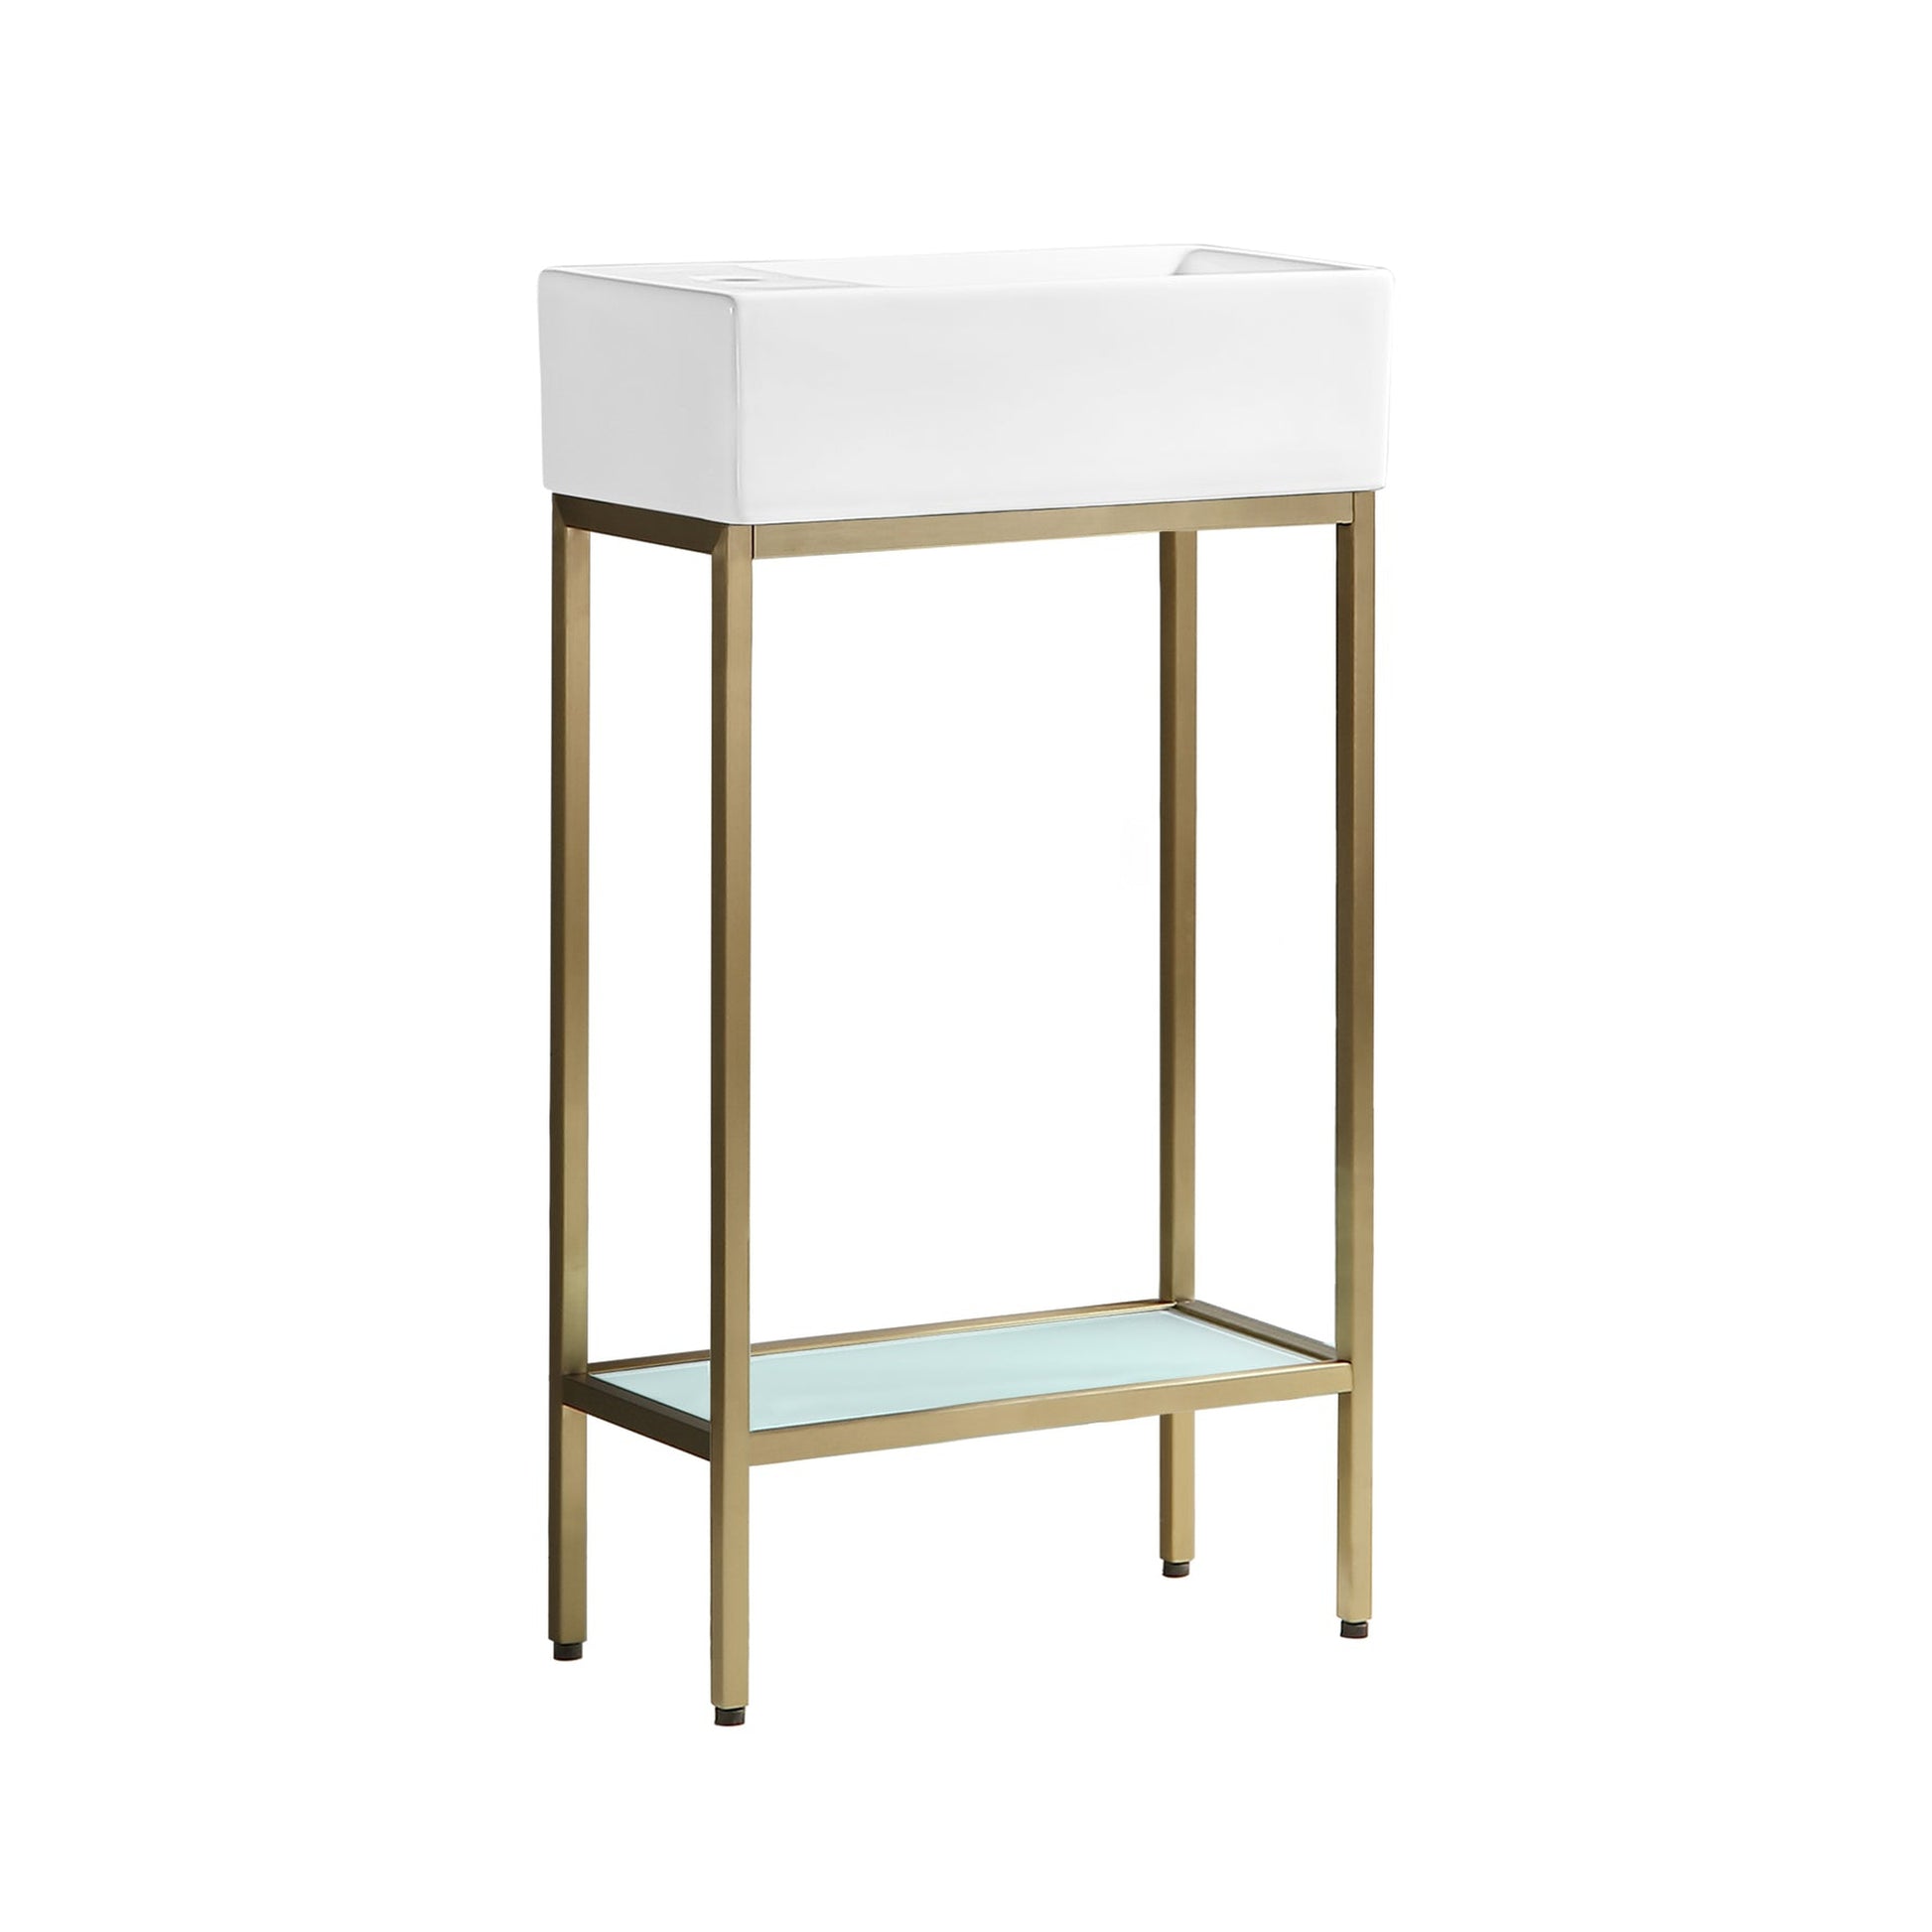 Swiss Madison Pierre 20" x 34" Freestanding White Bathroom Vanity With Ceramic Single Sink and Gold Metal Frame